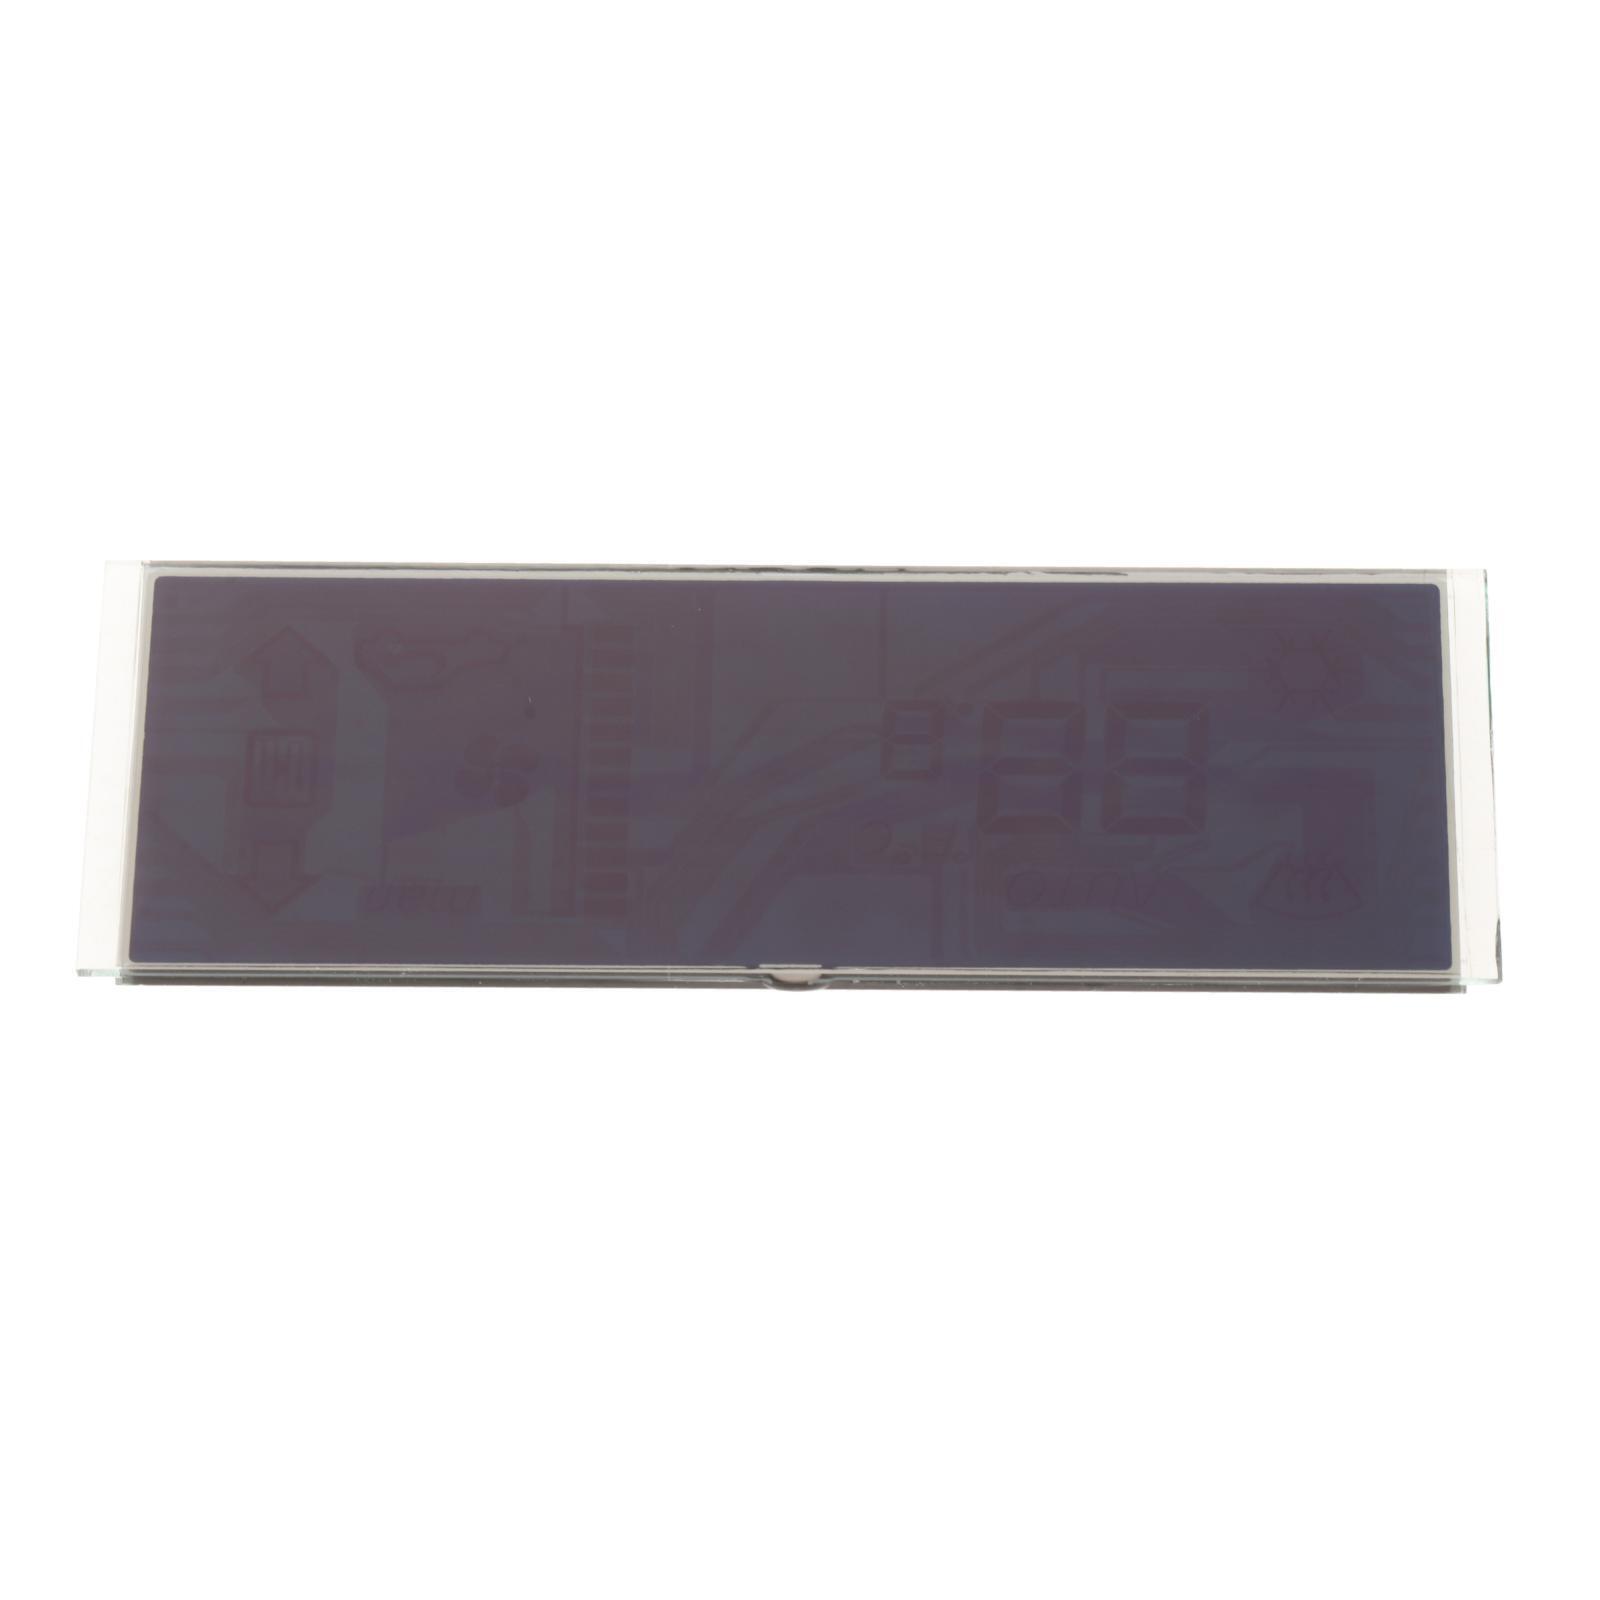 LCD Screen Replacement Fit for 911 996 Ruf 3400 S 1999-2002